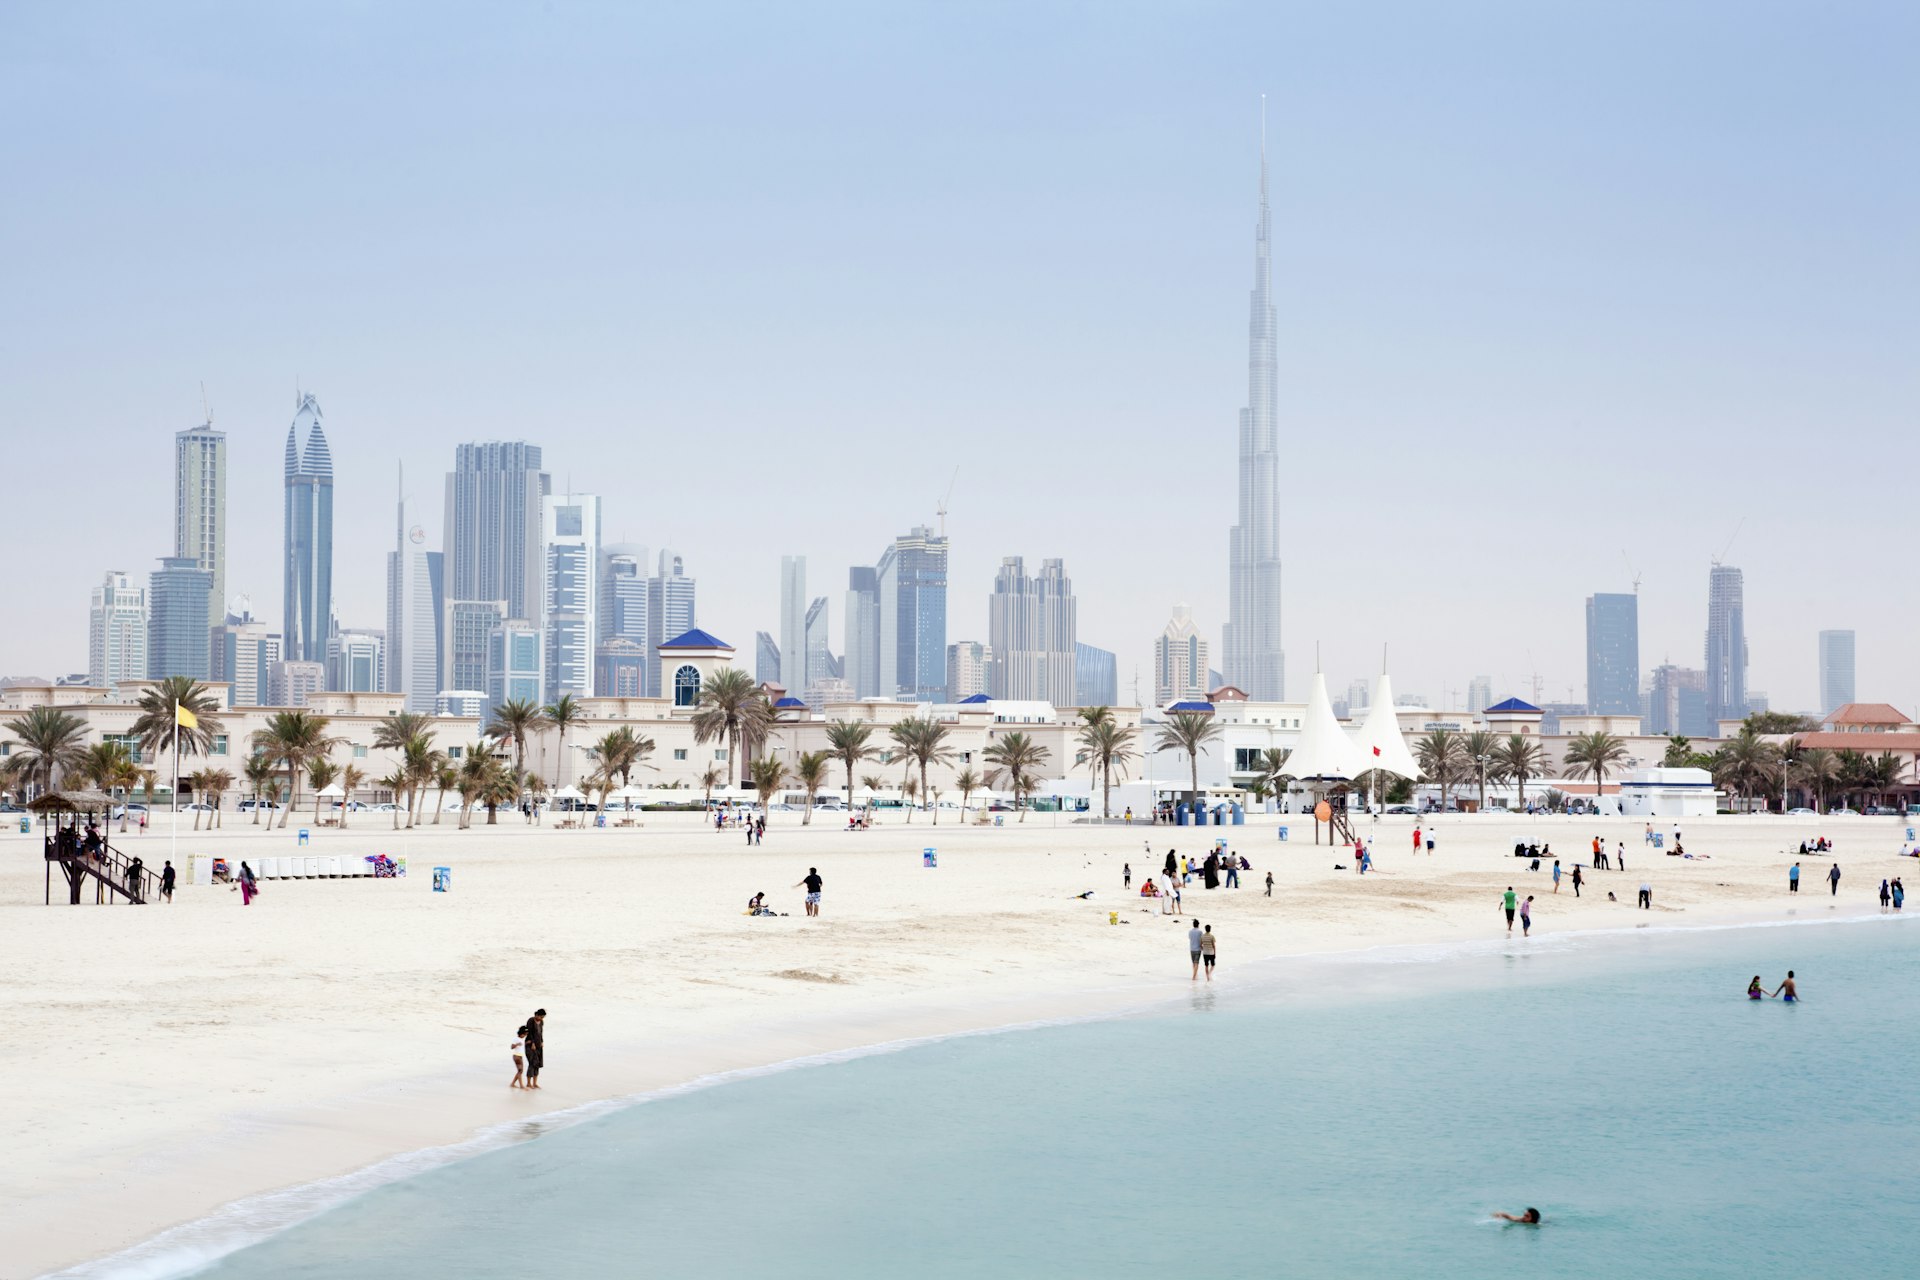 People swimming in the sea and walking along the shore of Jumeirah Beach with the Dubai skyline in the background